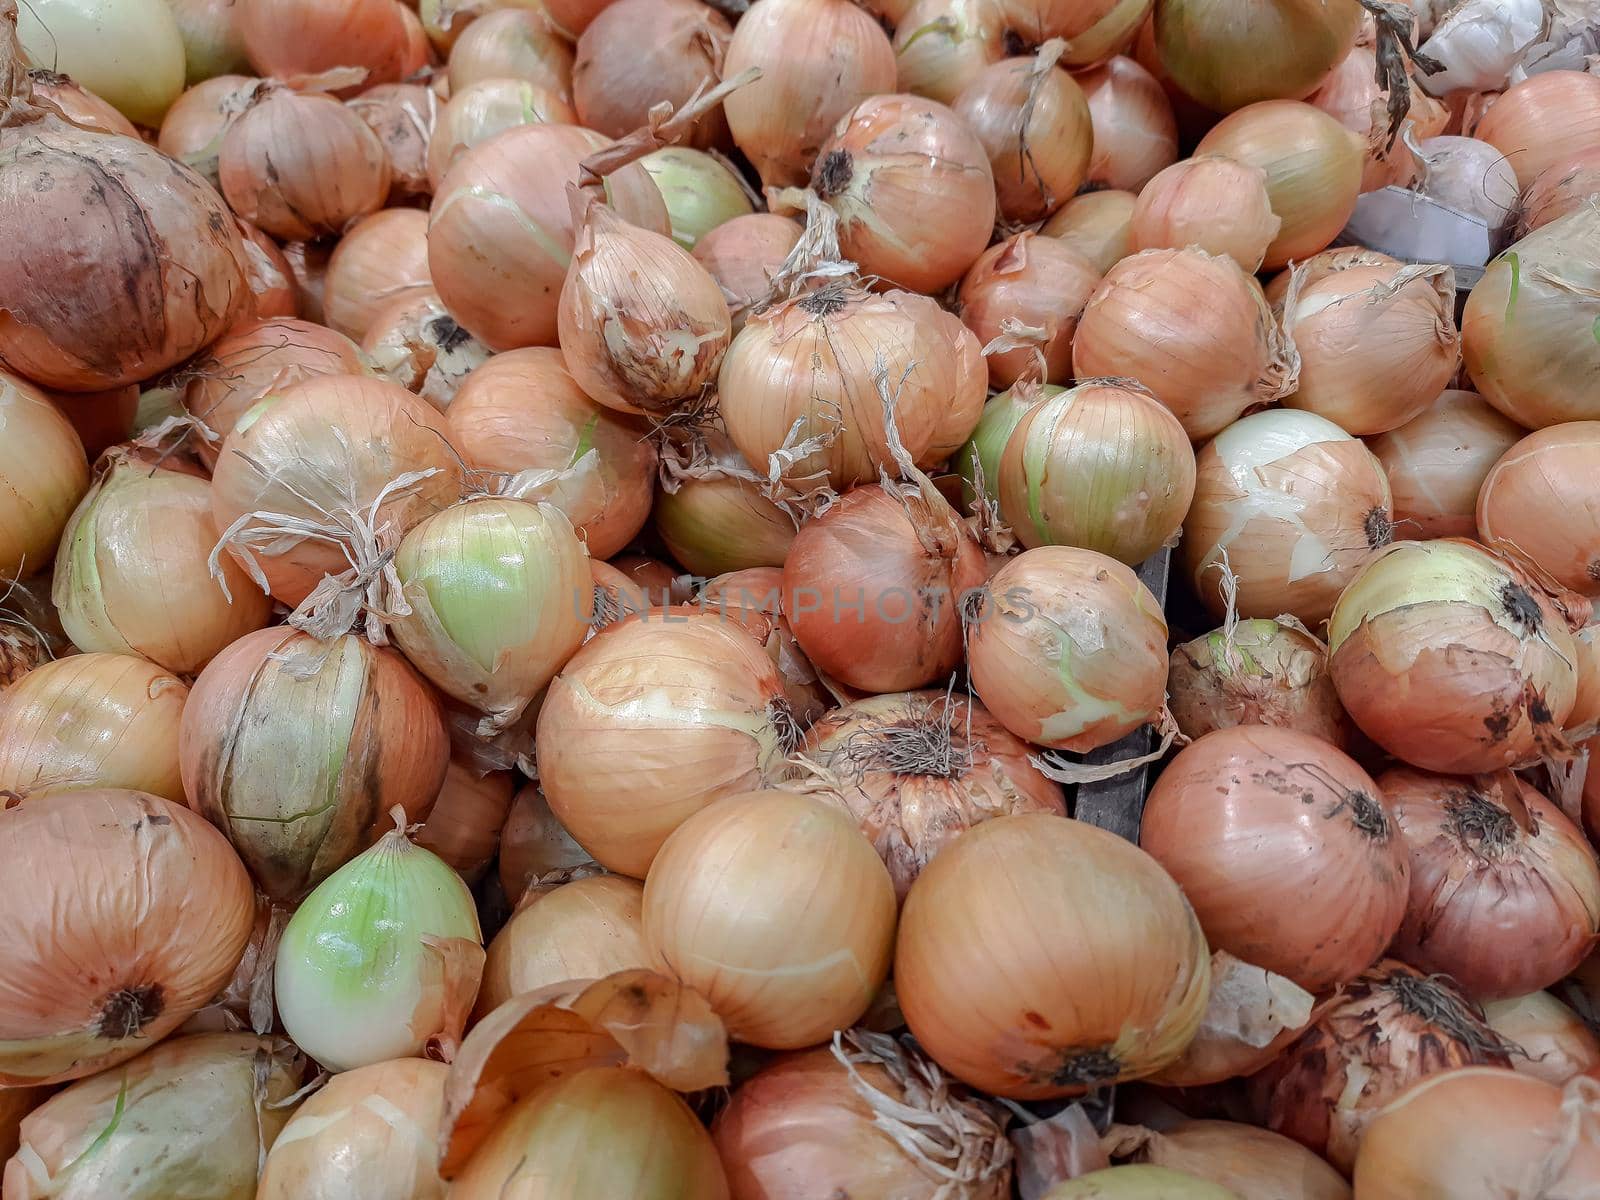 Harvest of onions. Close-up background image. Stock photo